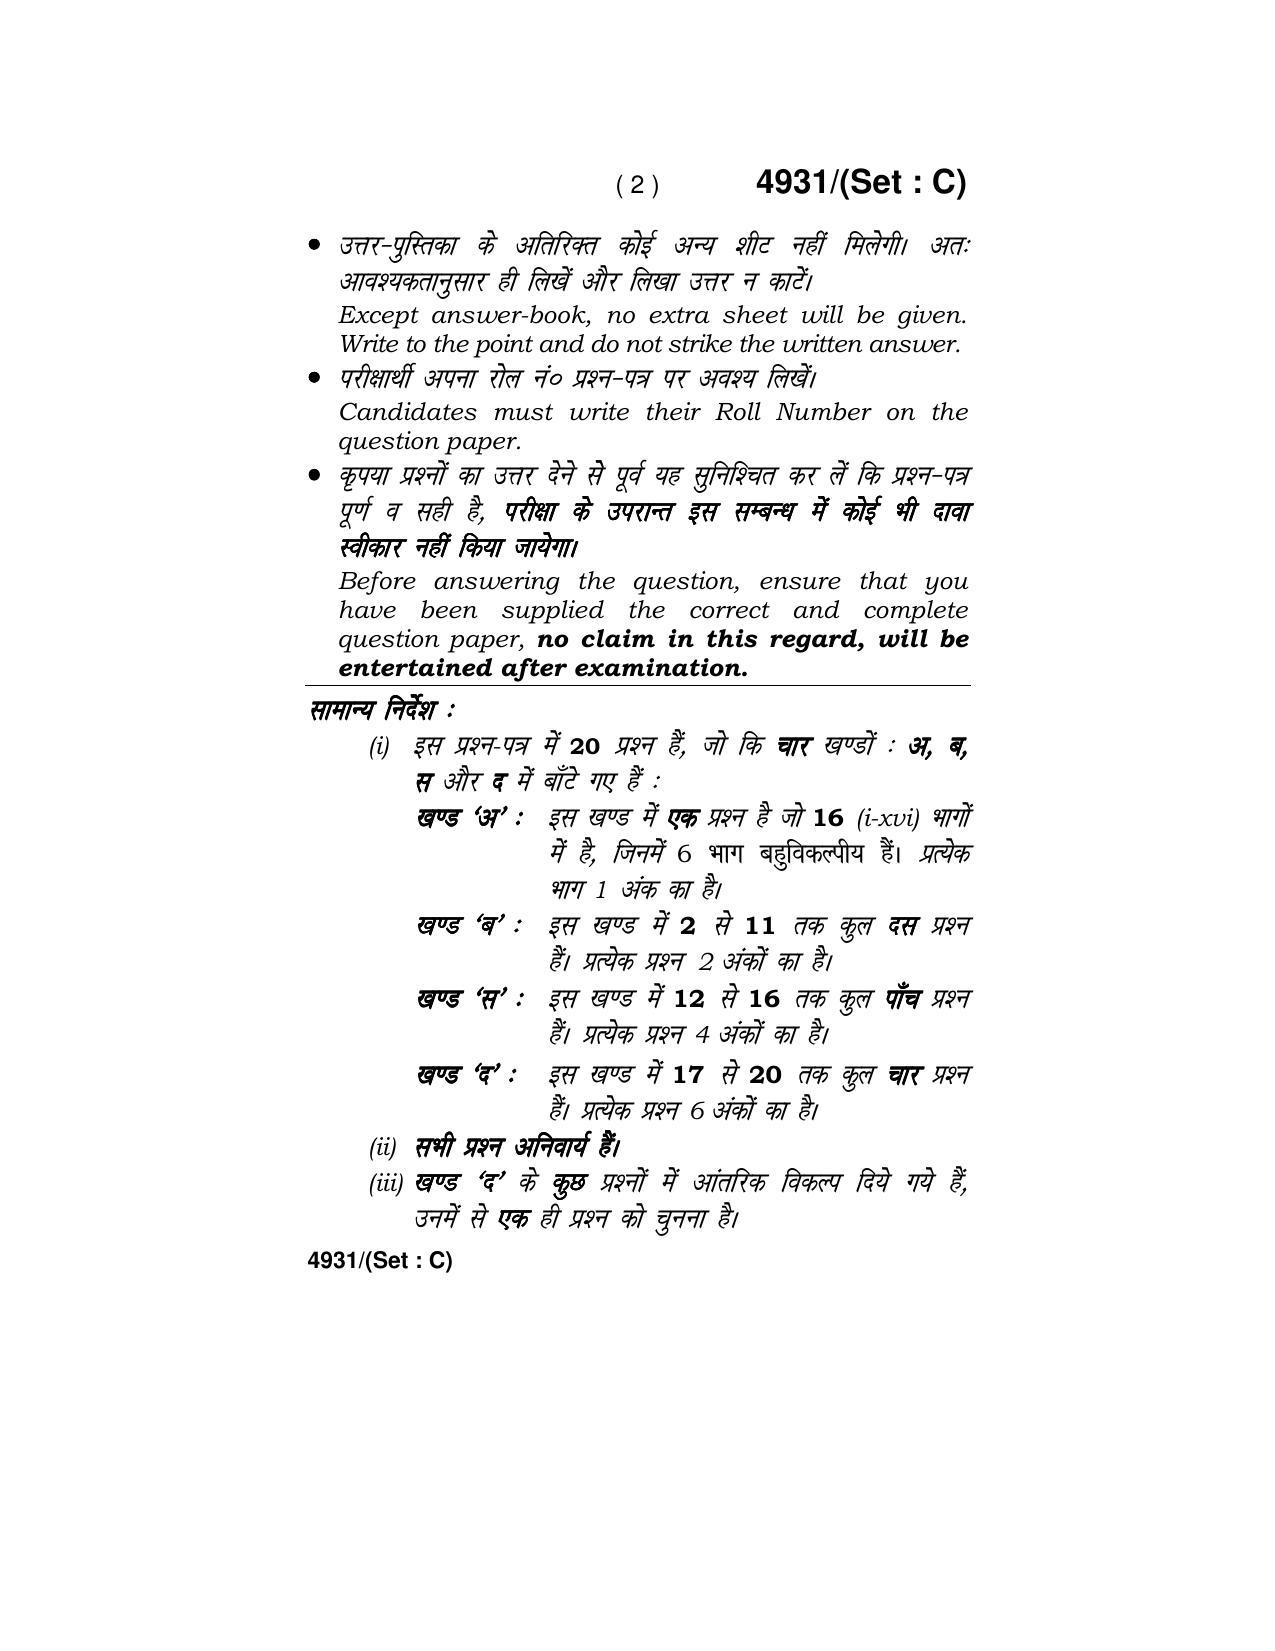 Haryana Board HBSE Class 12 Mathematics 2020 Question Paper - Page 34